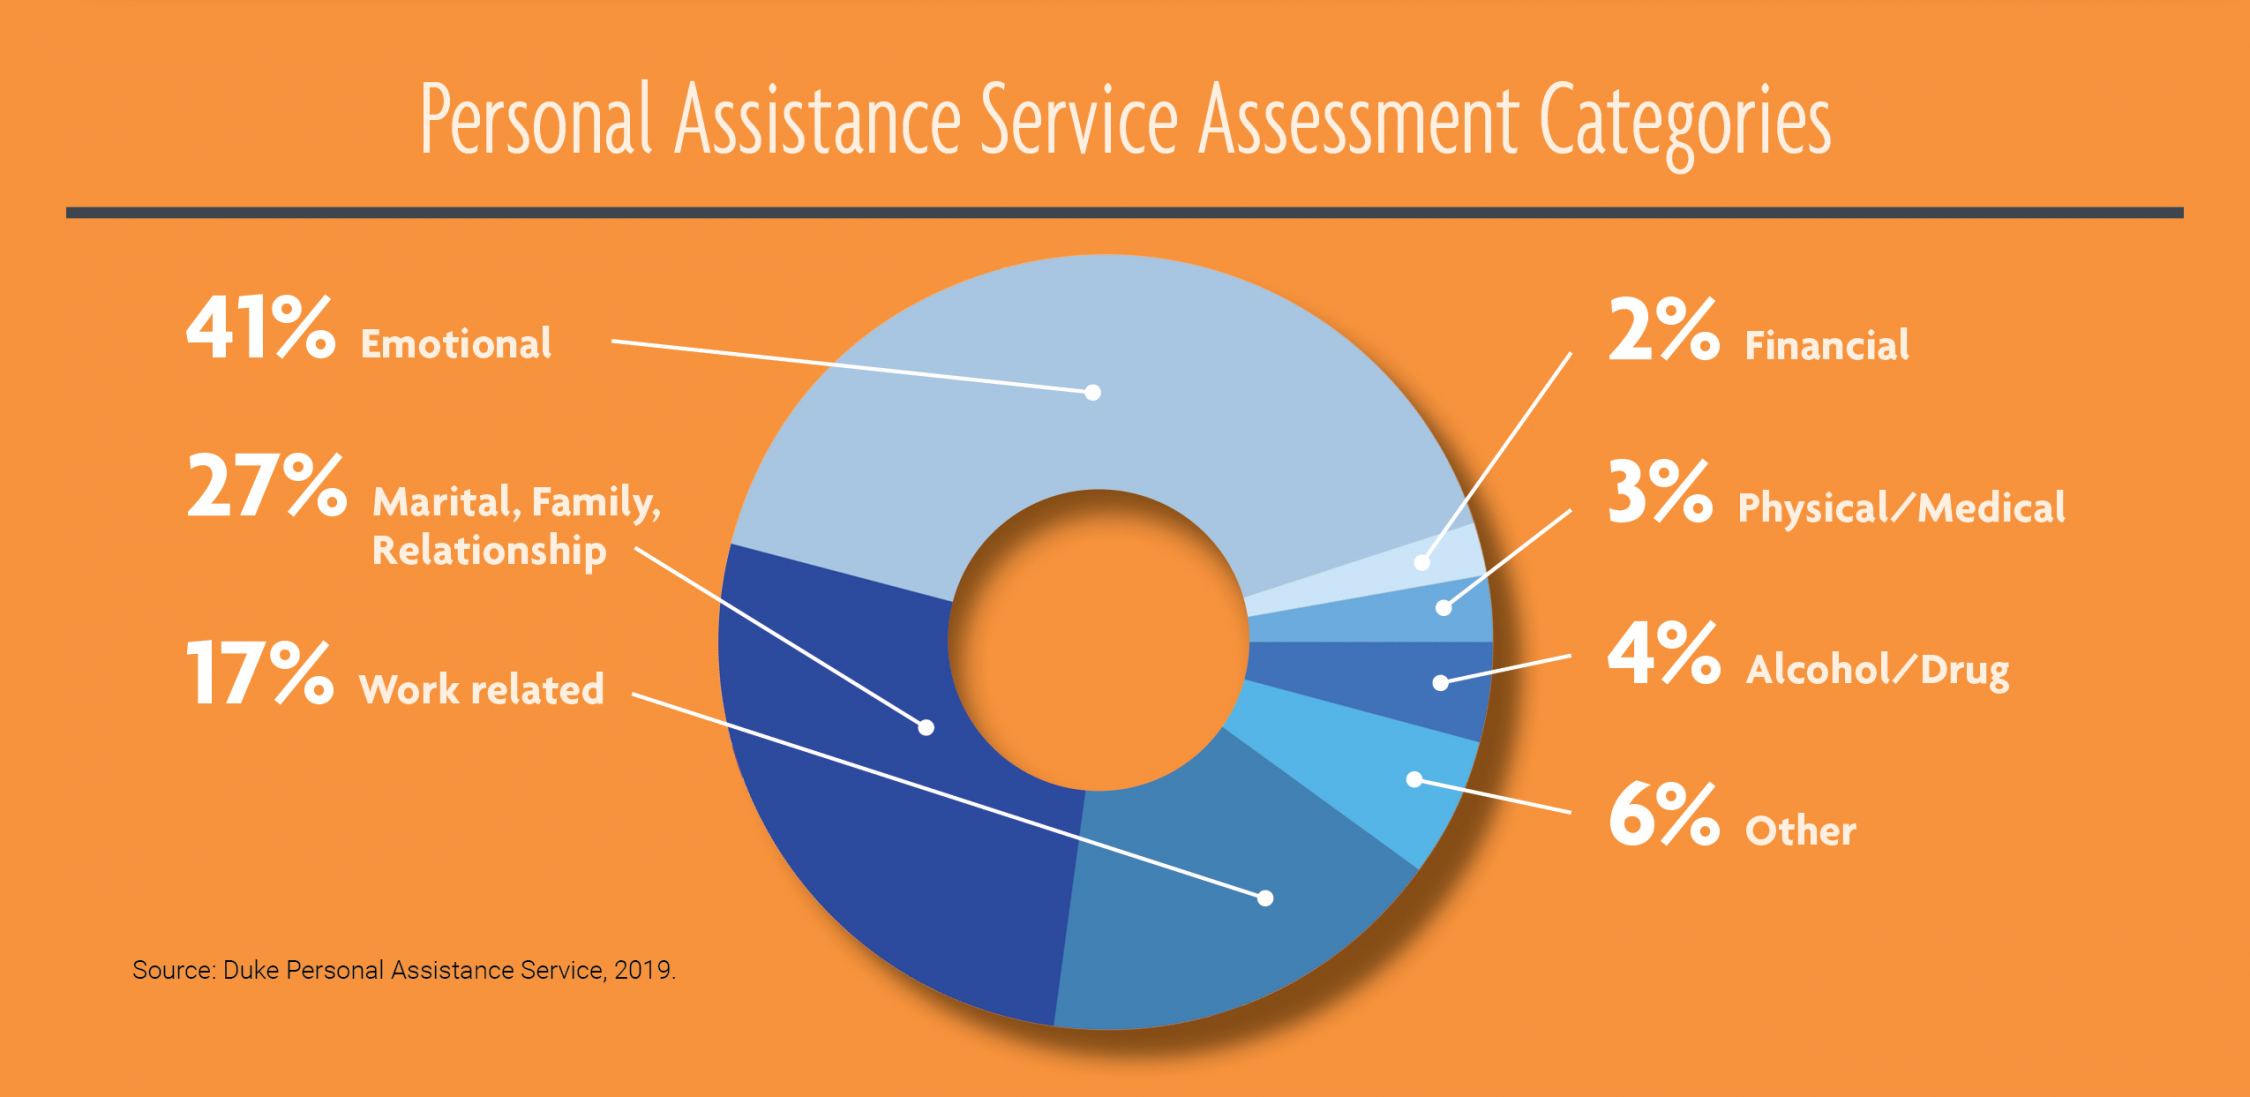 Personal Assistance Service Assessment Categories